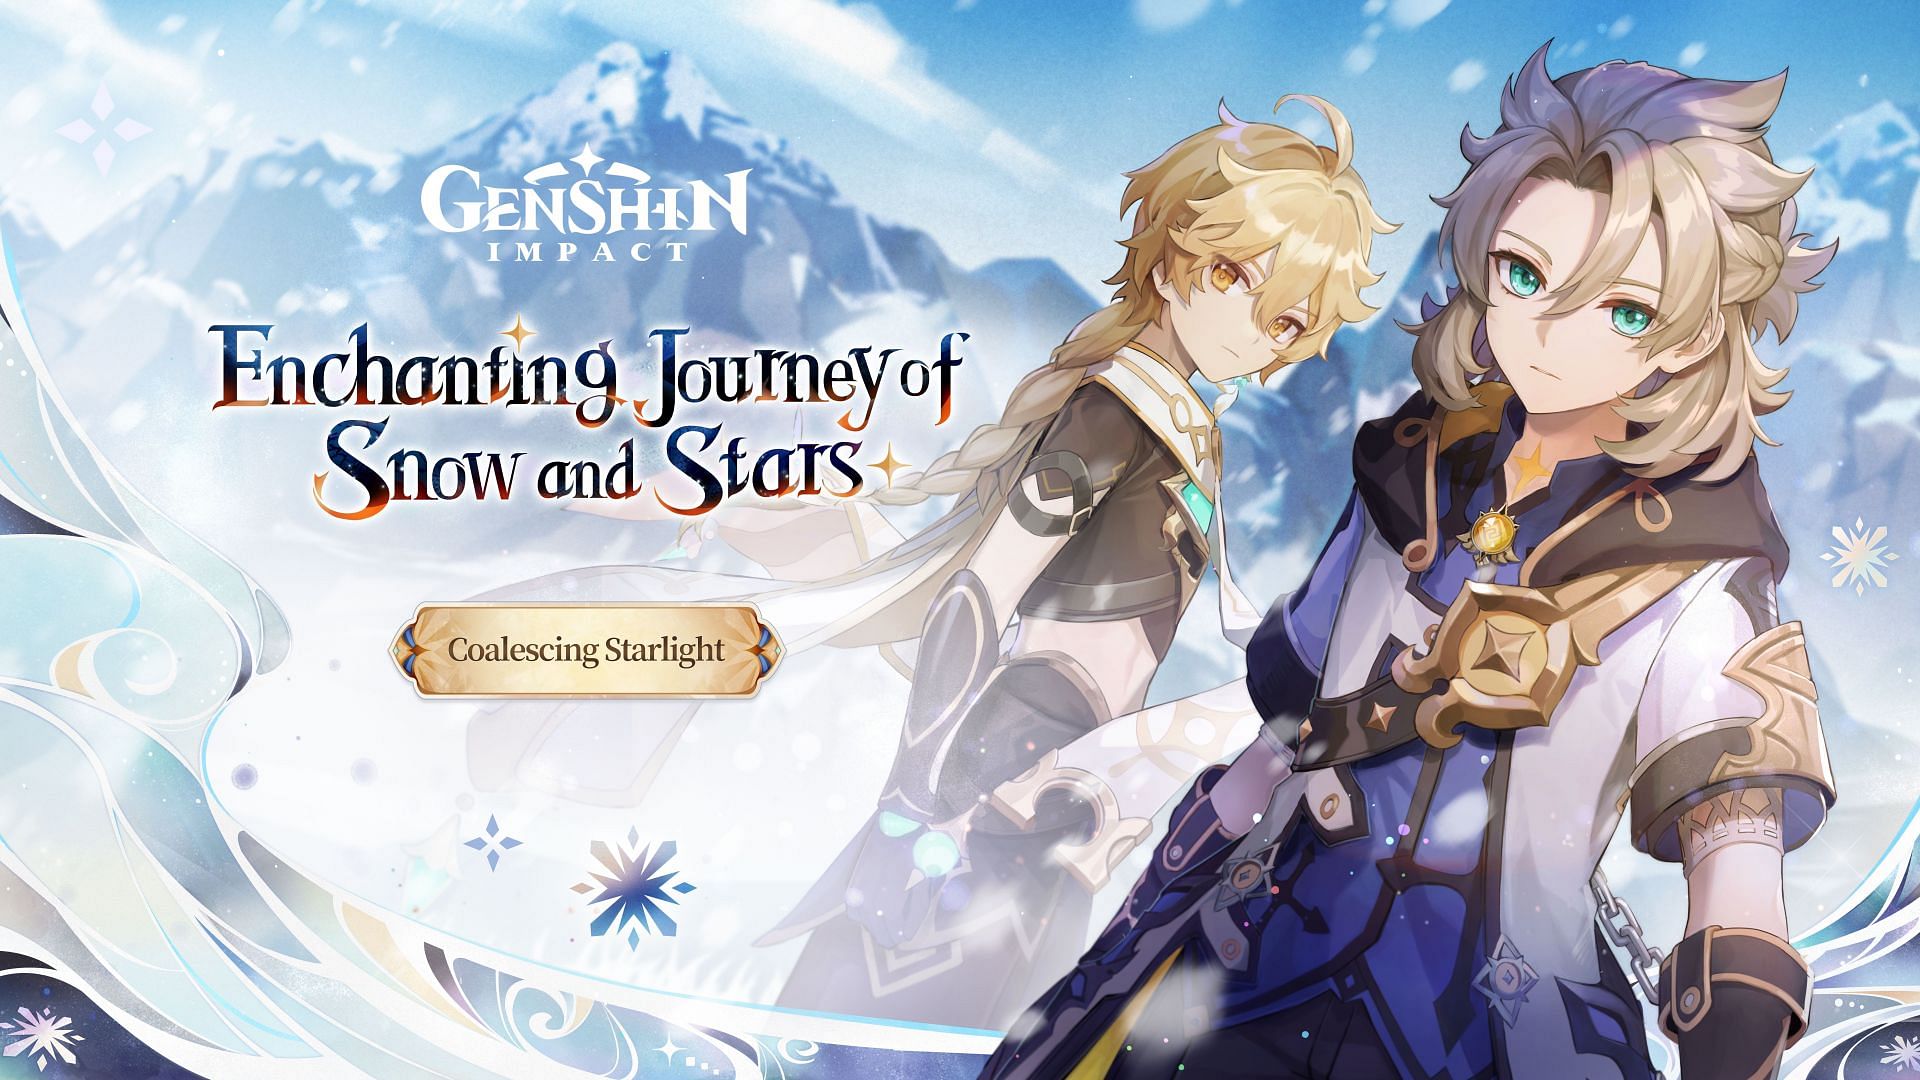 Enchanting Journey of Snow and Stars web event starts today (Image via Genshin Impact)